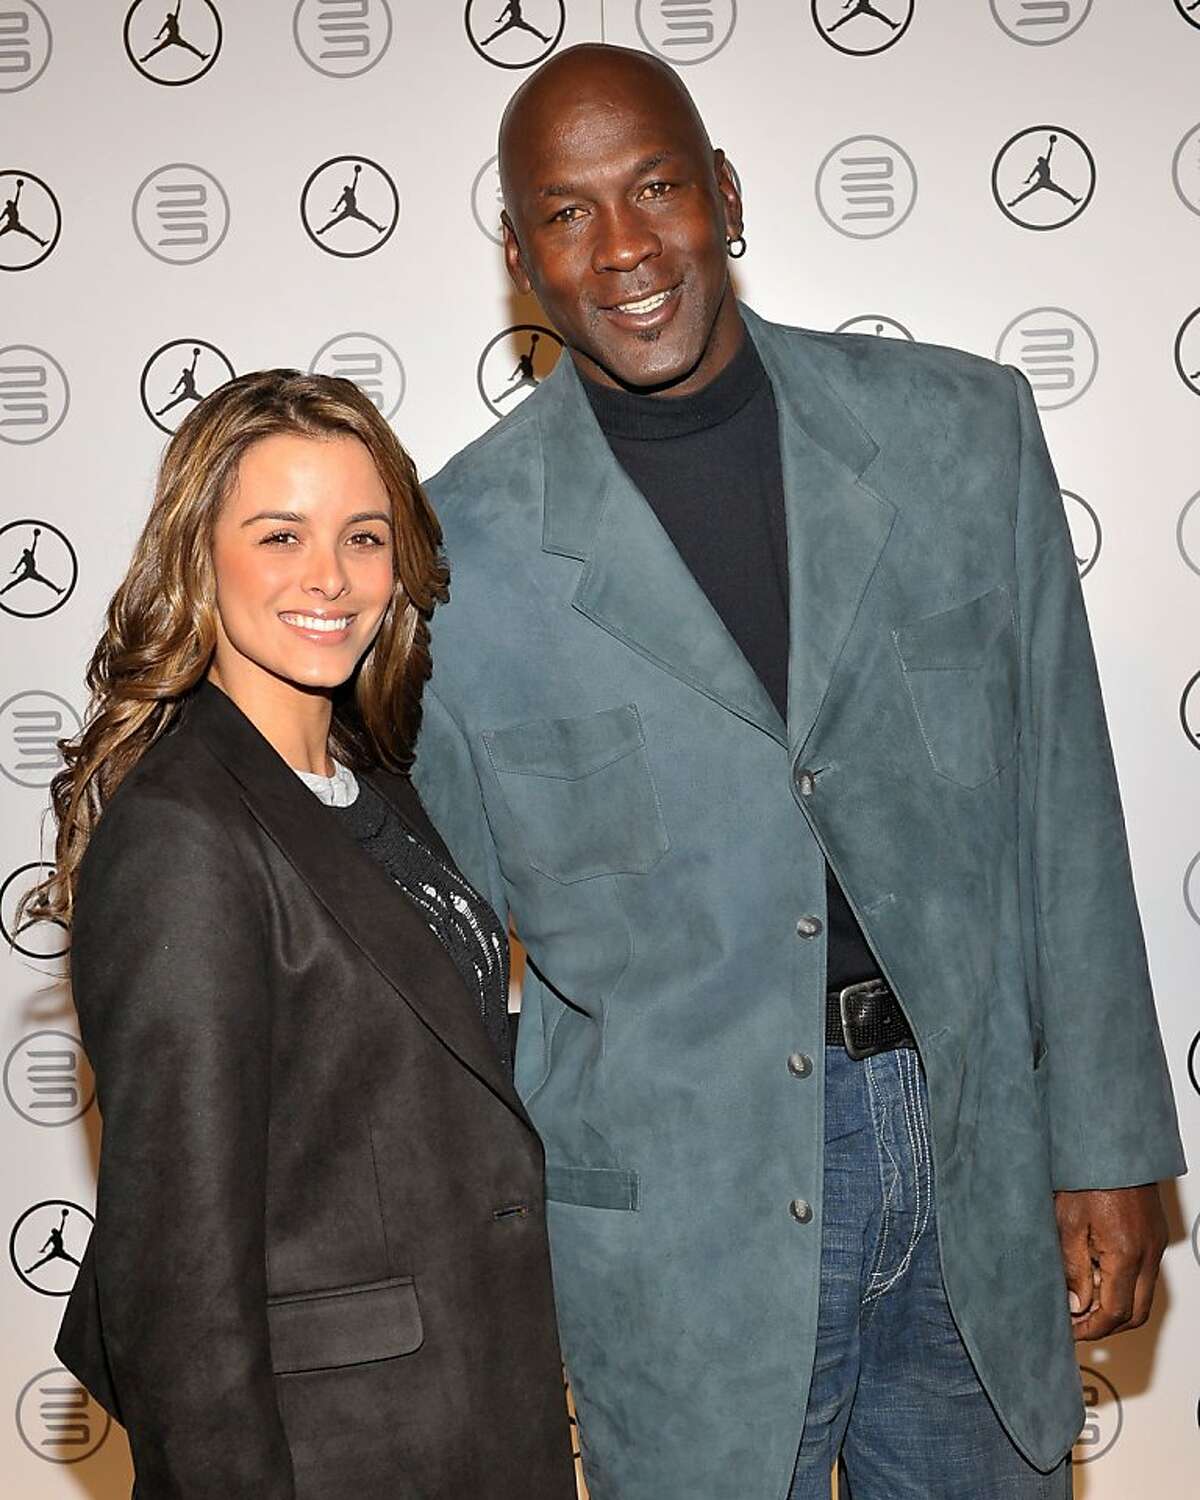 FILE - CHARLOTTE, NC: Yvette Prieto (L) and Michael Jordan attend the Exclusive FABULOUS 23 Dinner hosted by Jordan Brand during All-Star Weekend on February 12, 2010 in Dallas, Texas. Michael Jordan, 48 years-old and Cuban-American model Yvette Prieto, 32 years-old, announced their engagement on December 29, 2011. The couple have been dating for three years. This will be Jordan's second marriage. His divorce from Juanita Vanoy was finalized in 2006. Michael Jordan has three children from that marriage. (Photo by Charley Gallay/Getty Images for Jordan Brand)